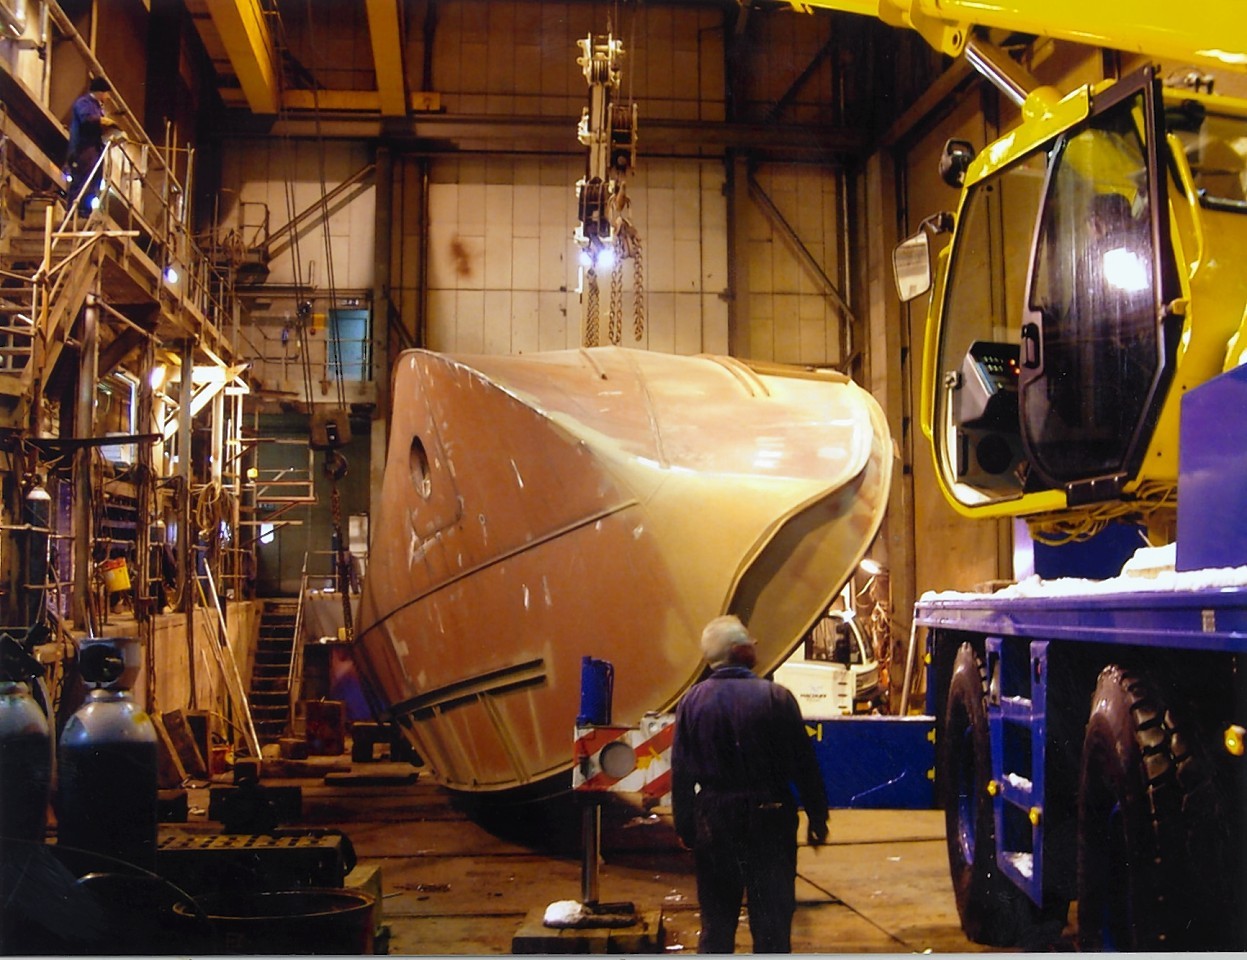 Work on another new vessel at Macduff Shipyards